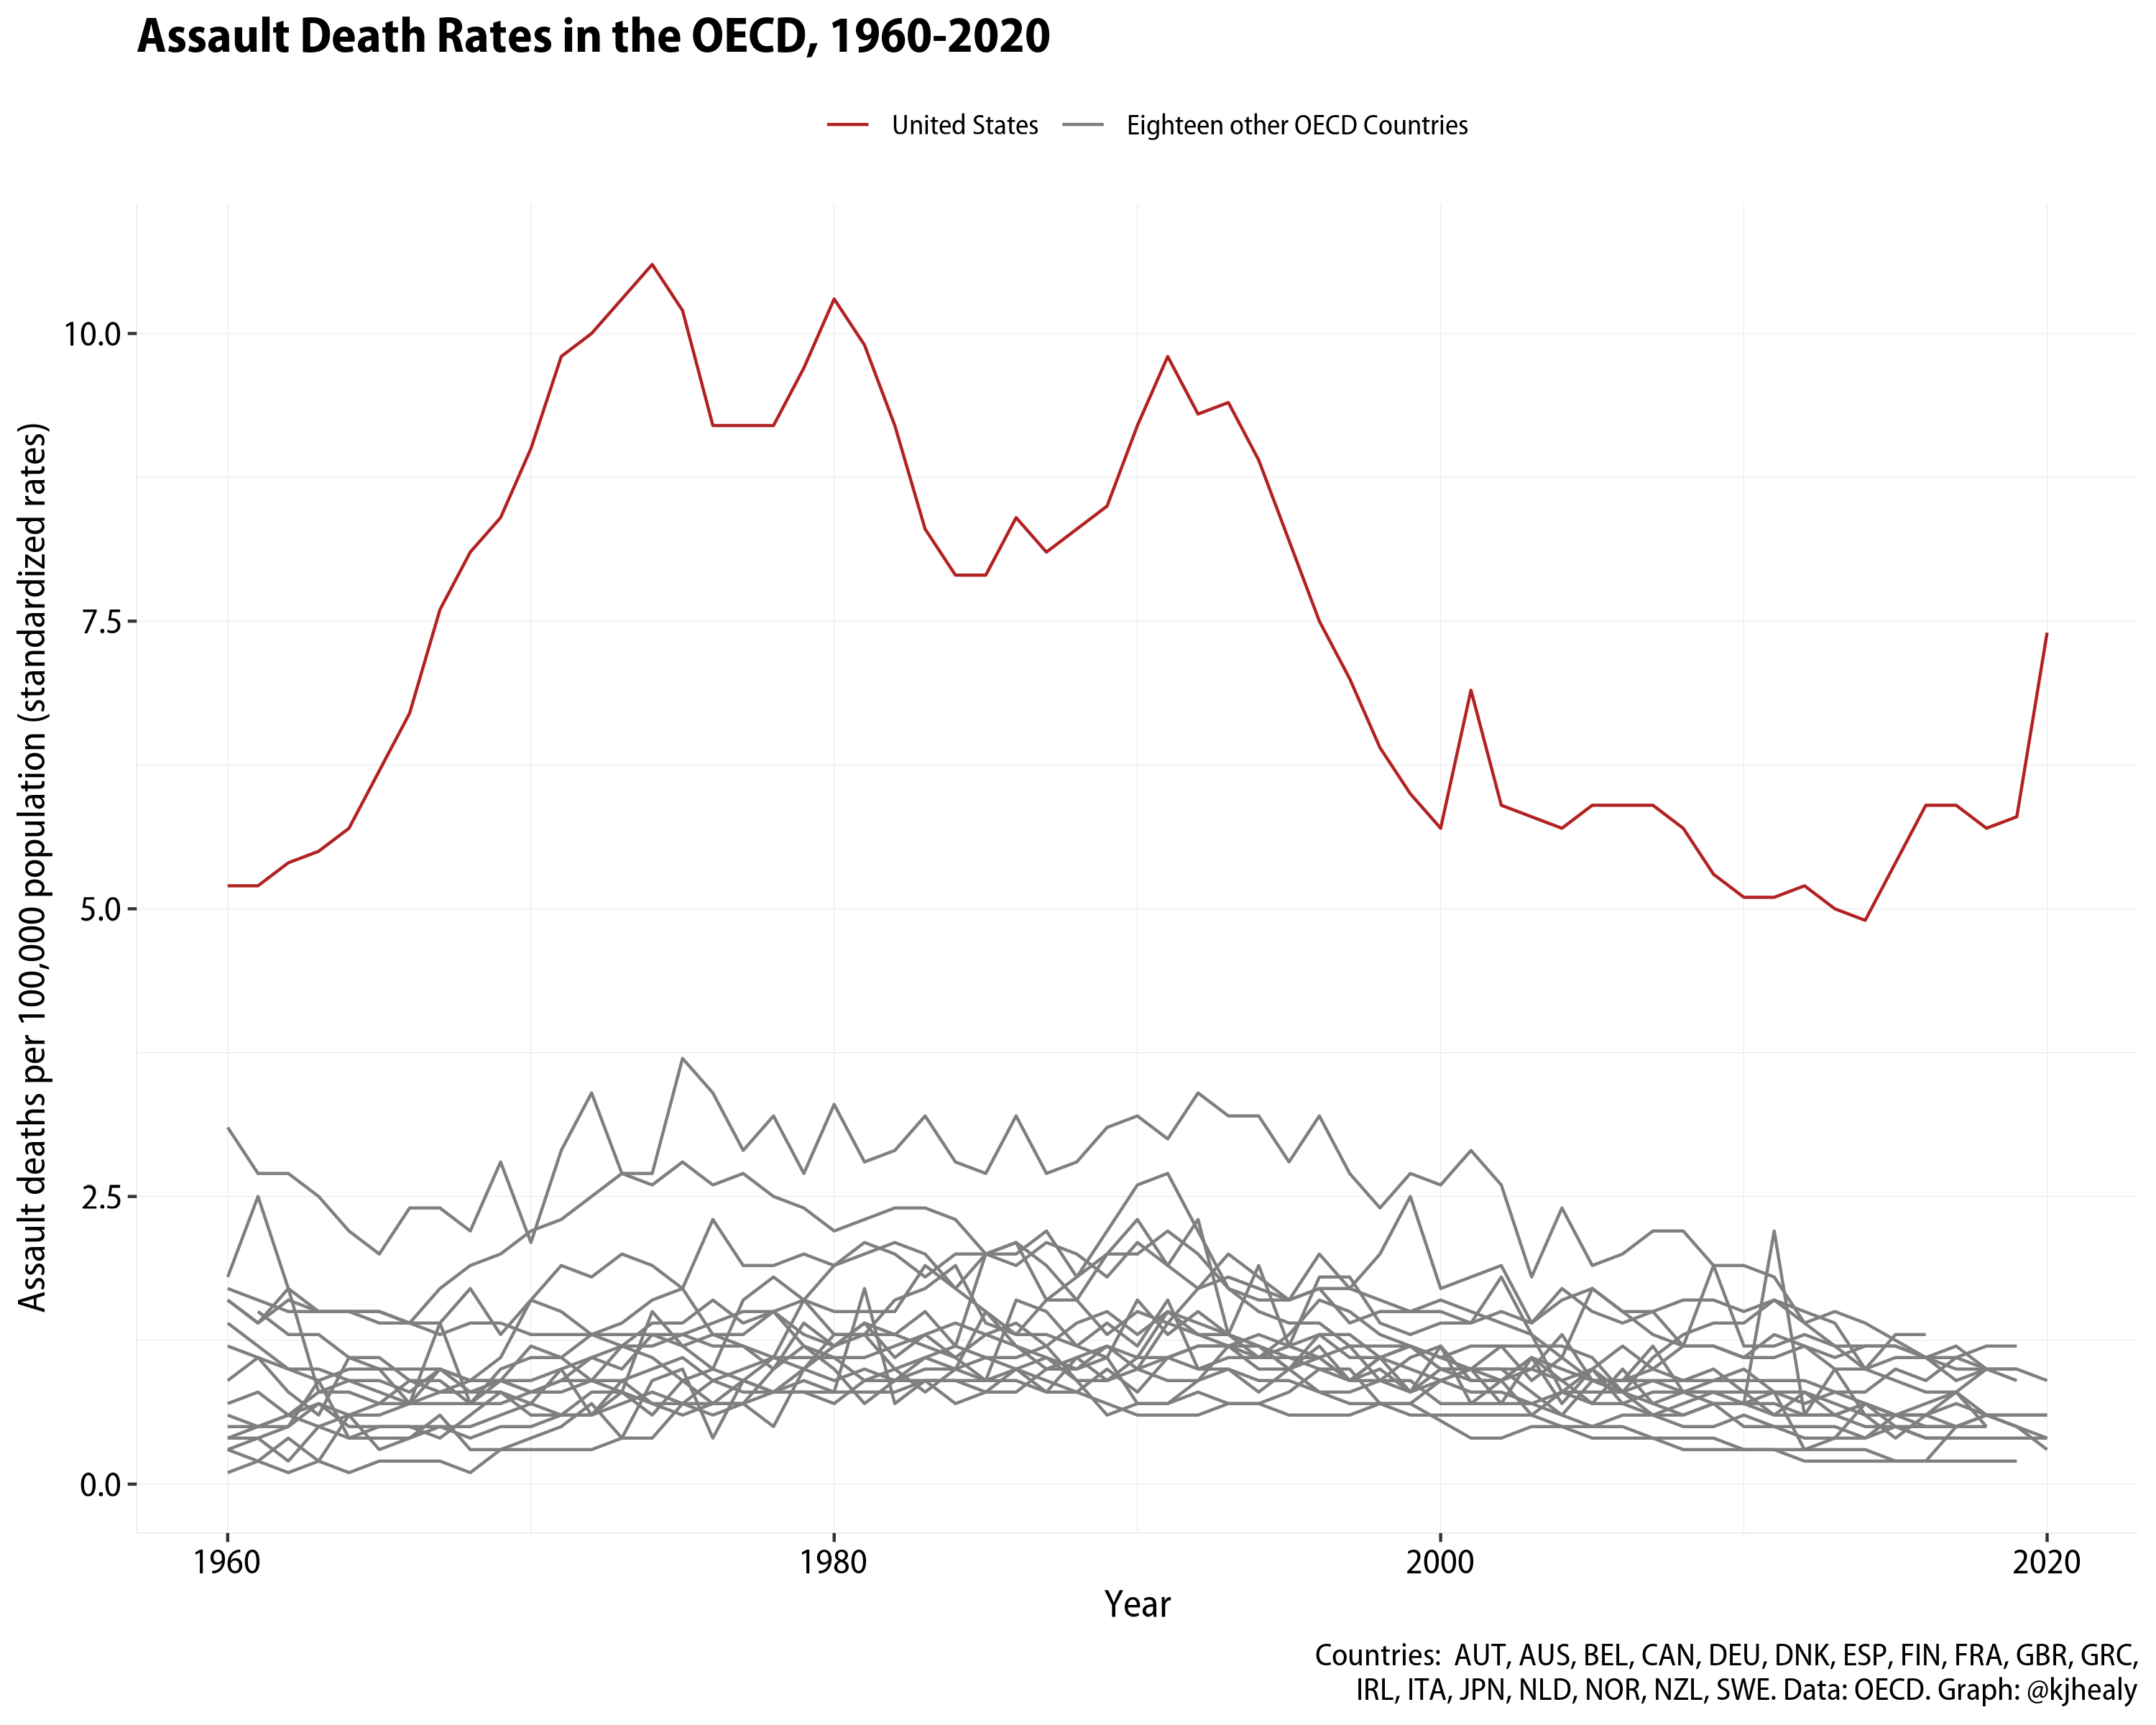 Assault deaths in the OECD, 1960-2020.